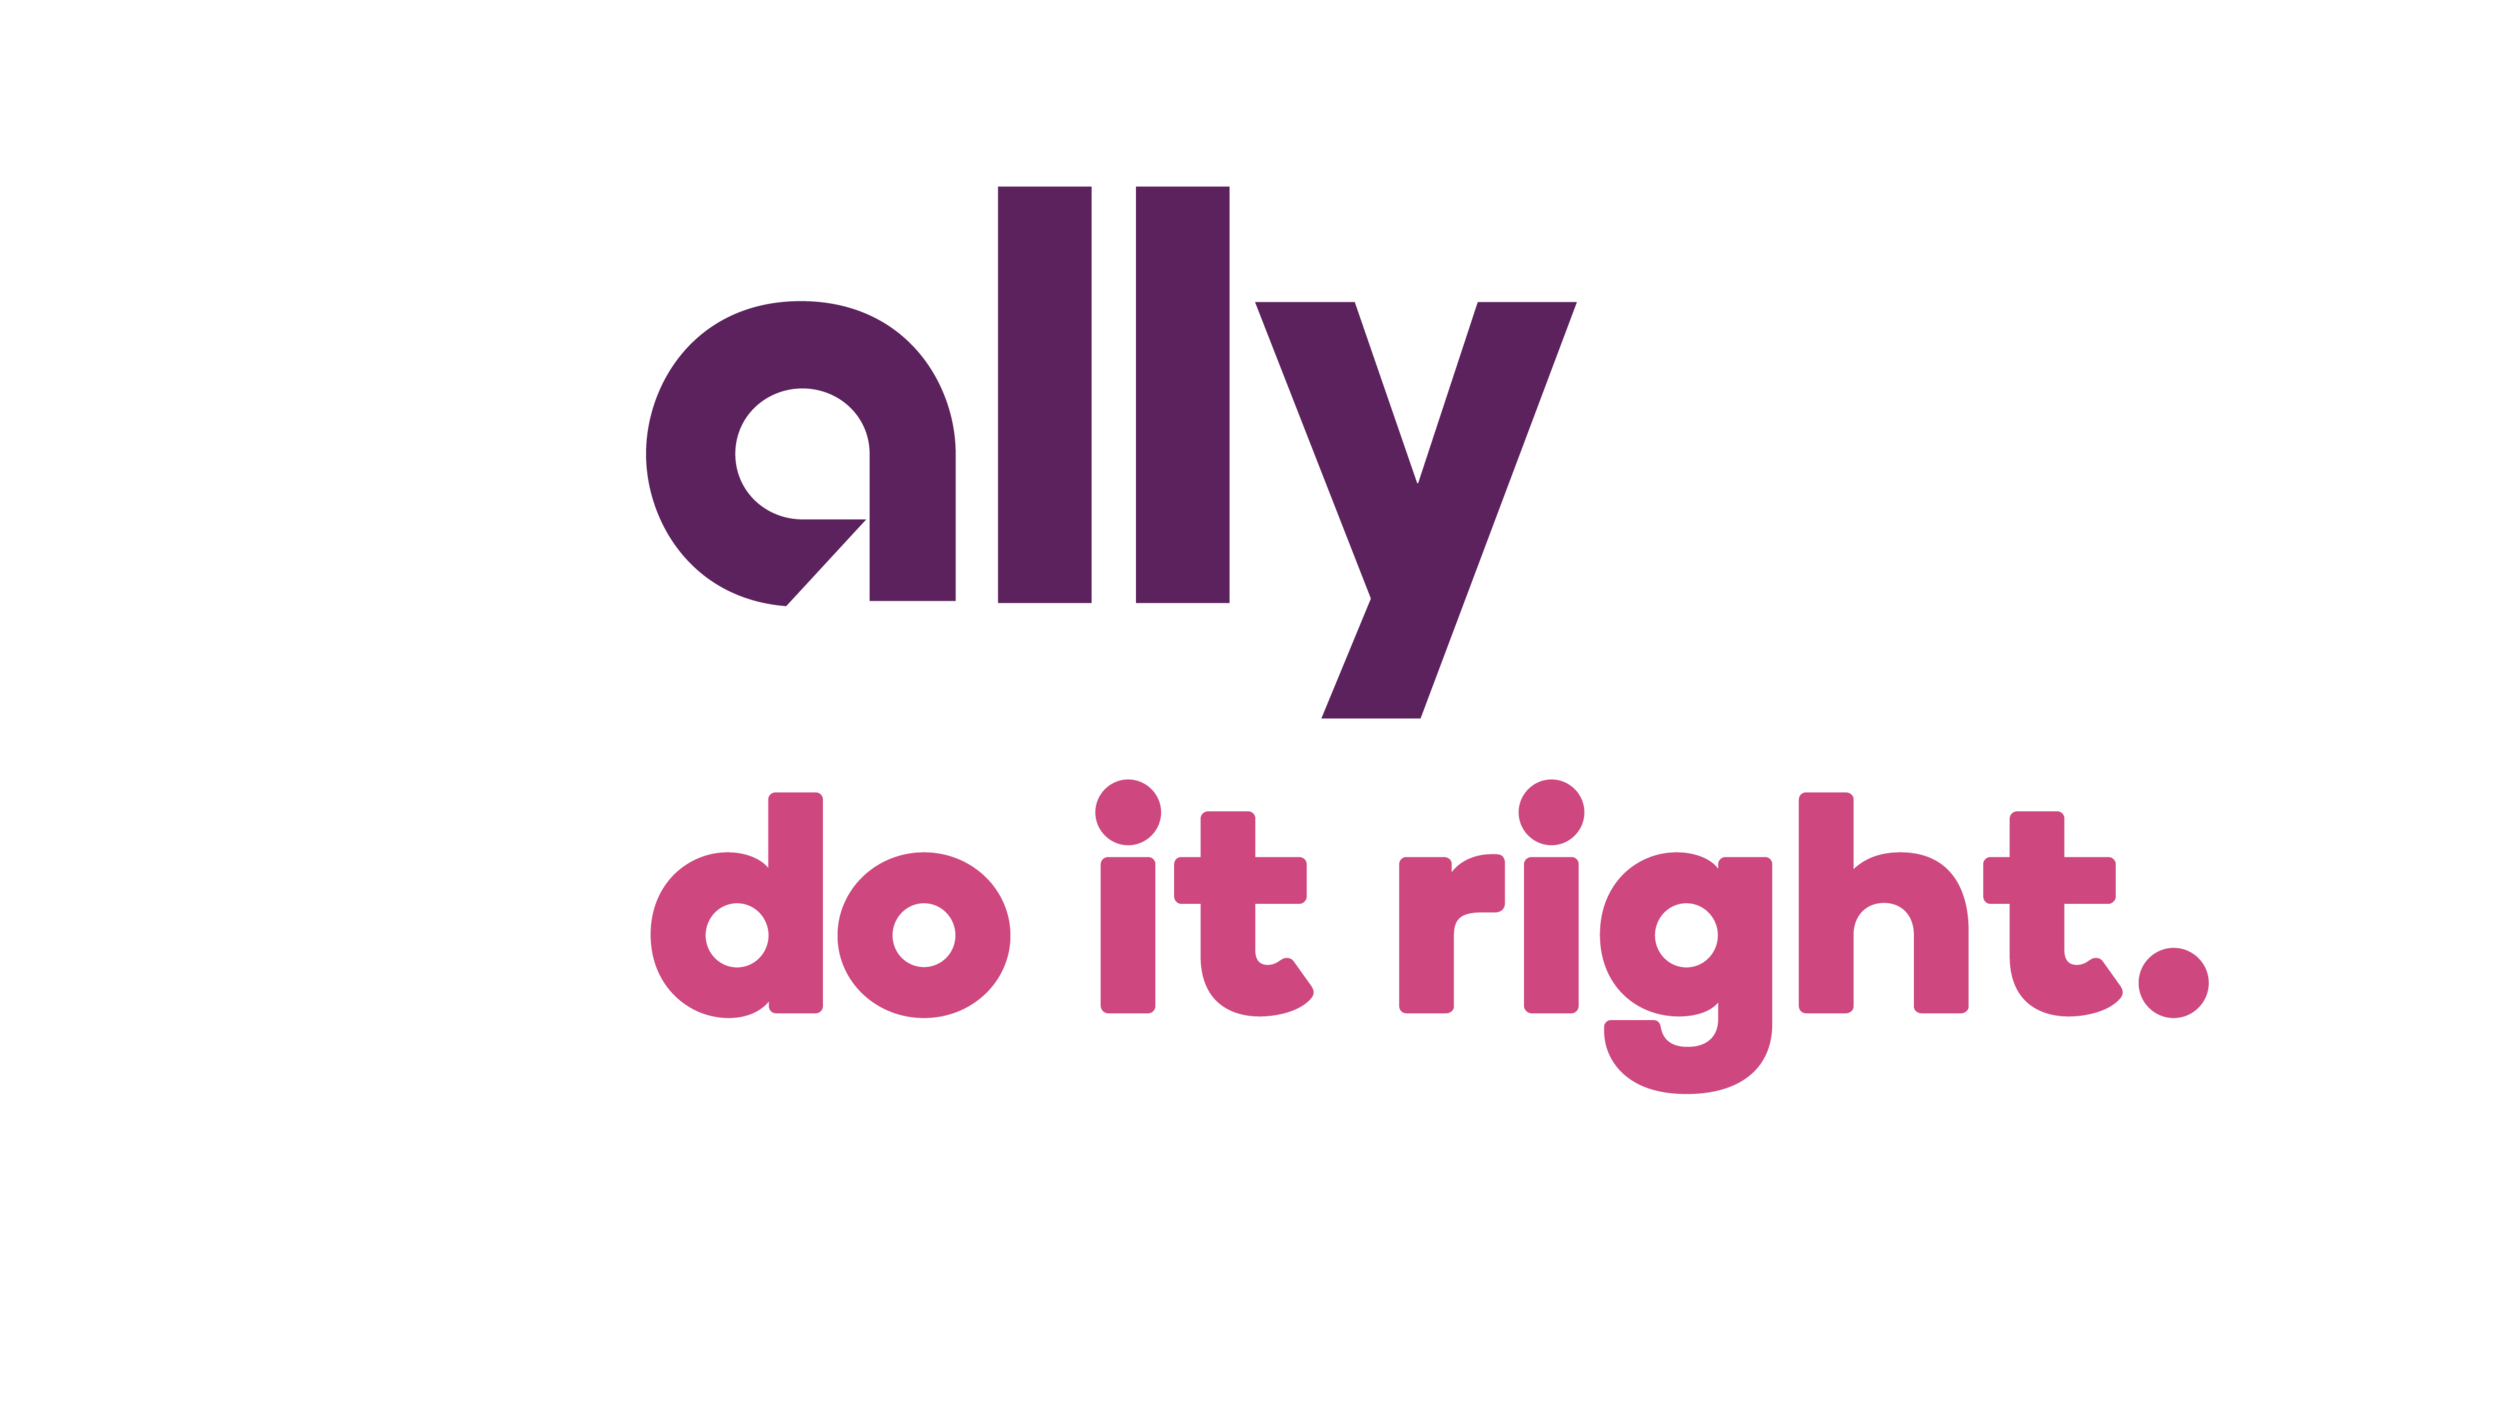 Ally_Final Logos and Pairings_11.14.2018-03.png